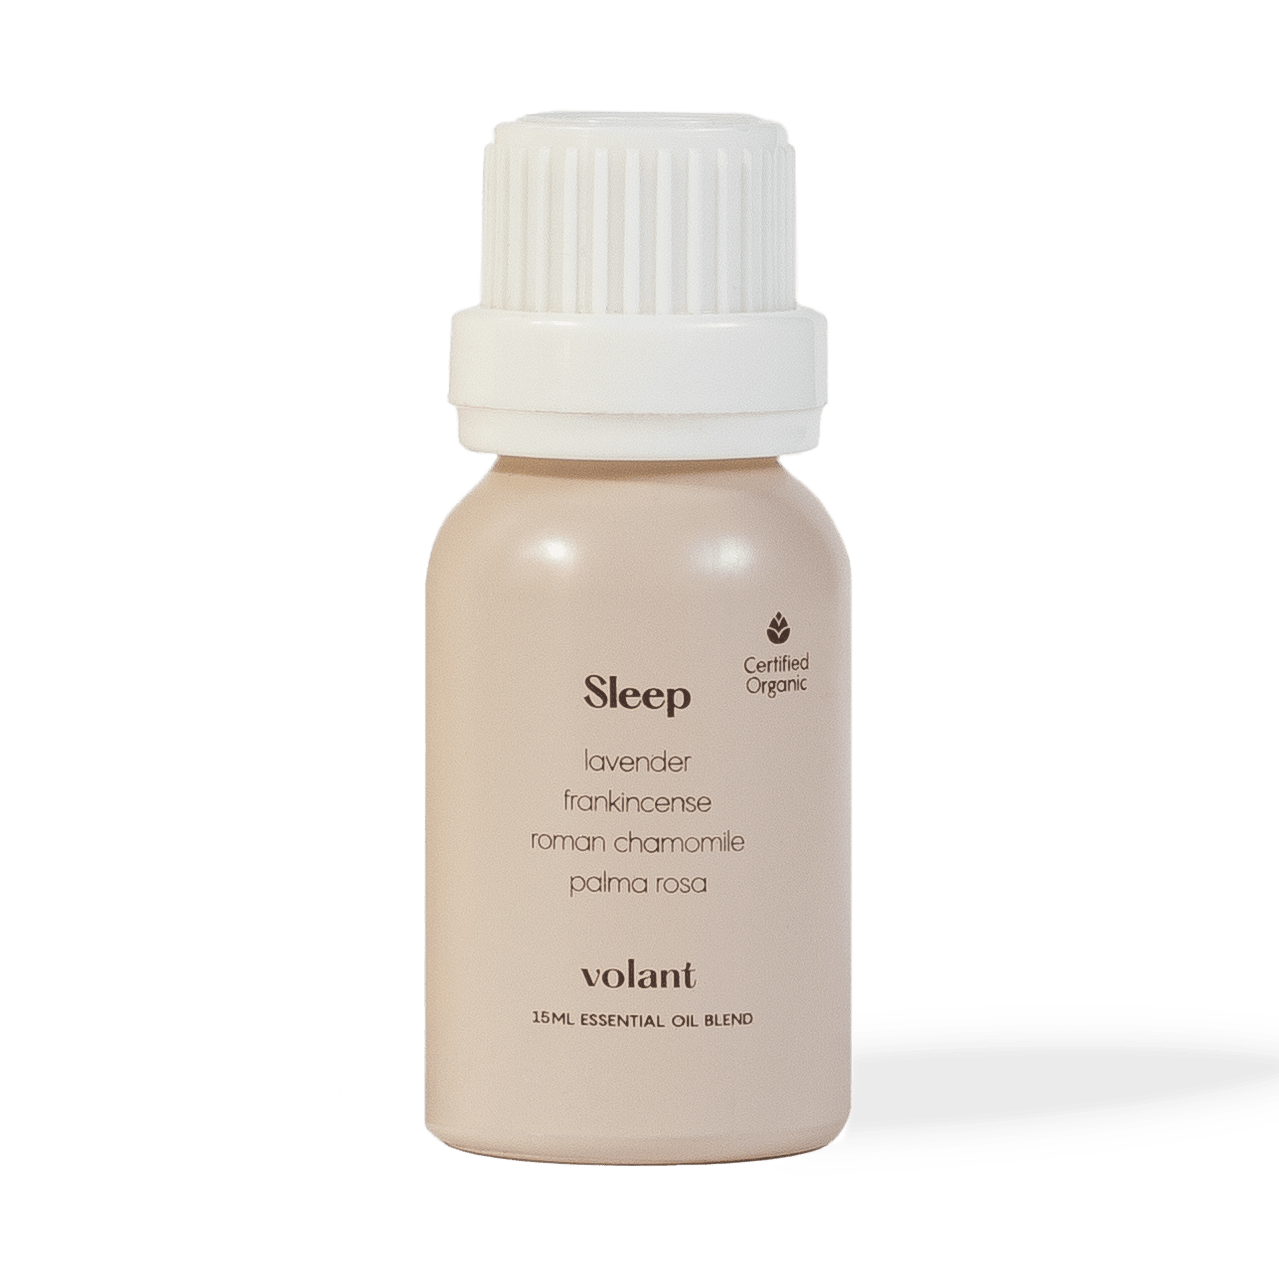 volant sleep essential oil blend bottle made with pure Lavender, Frankincense, and Palma Rosa and Roman Chamomile